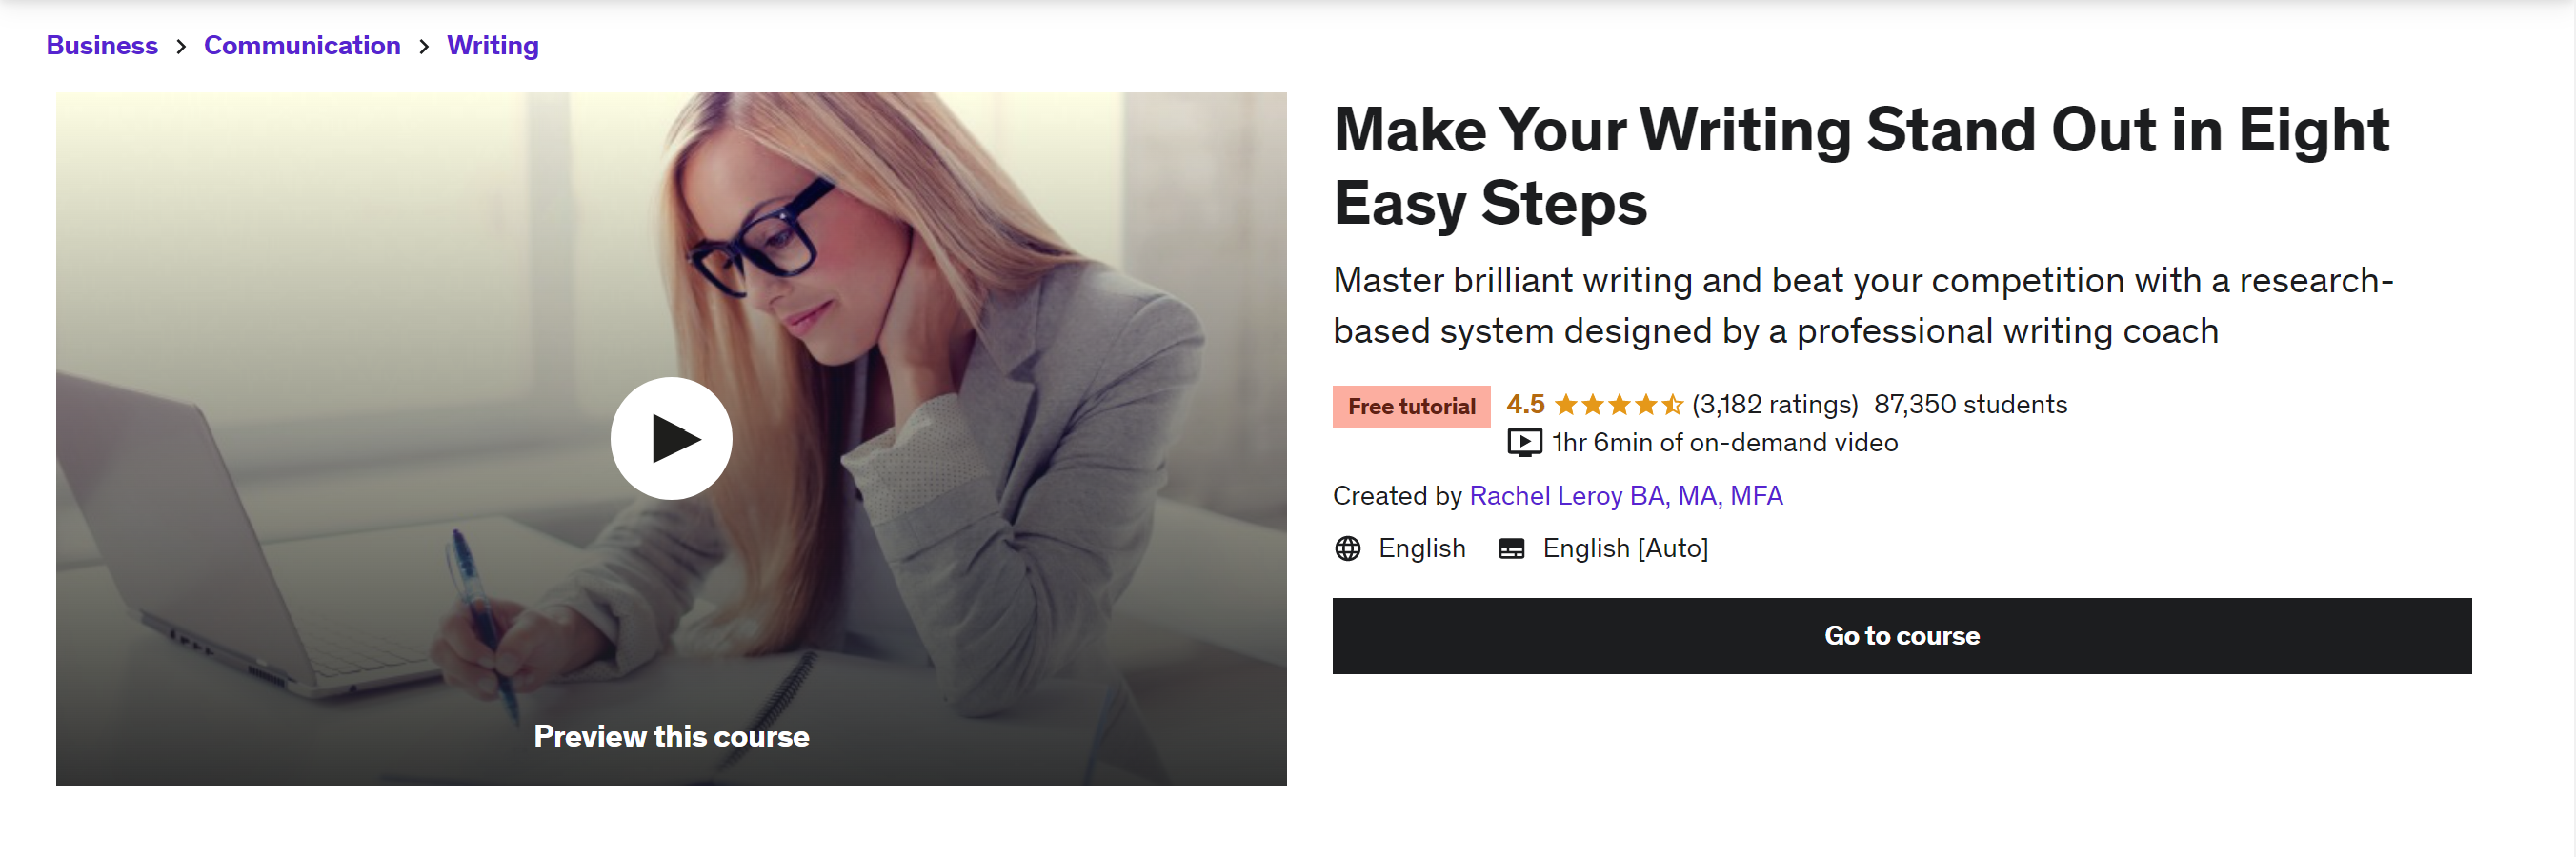 Make Your Writing Stand out In Eight Easy Steps